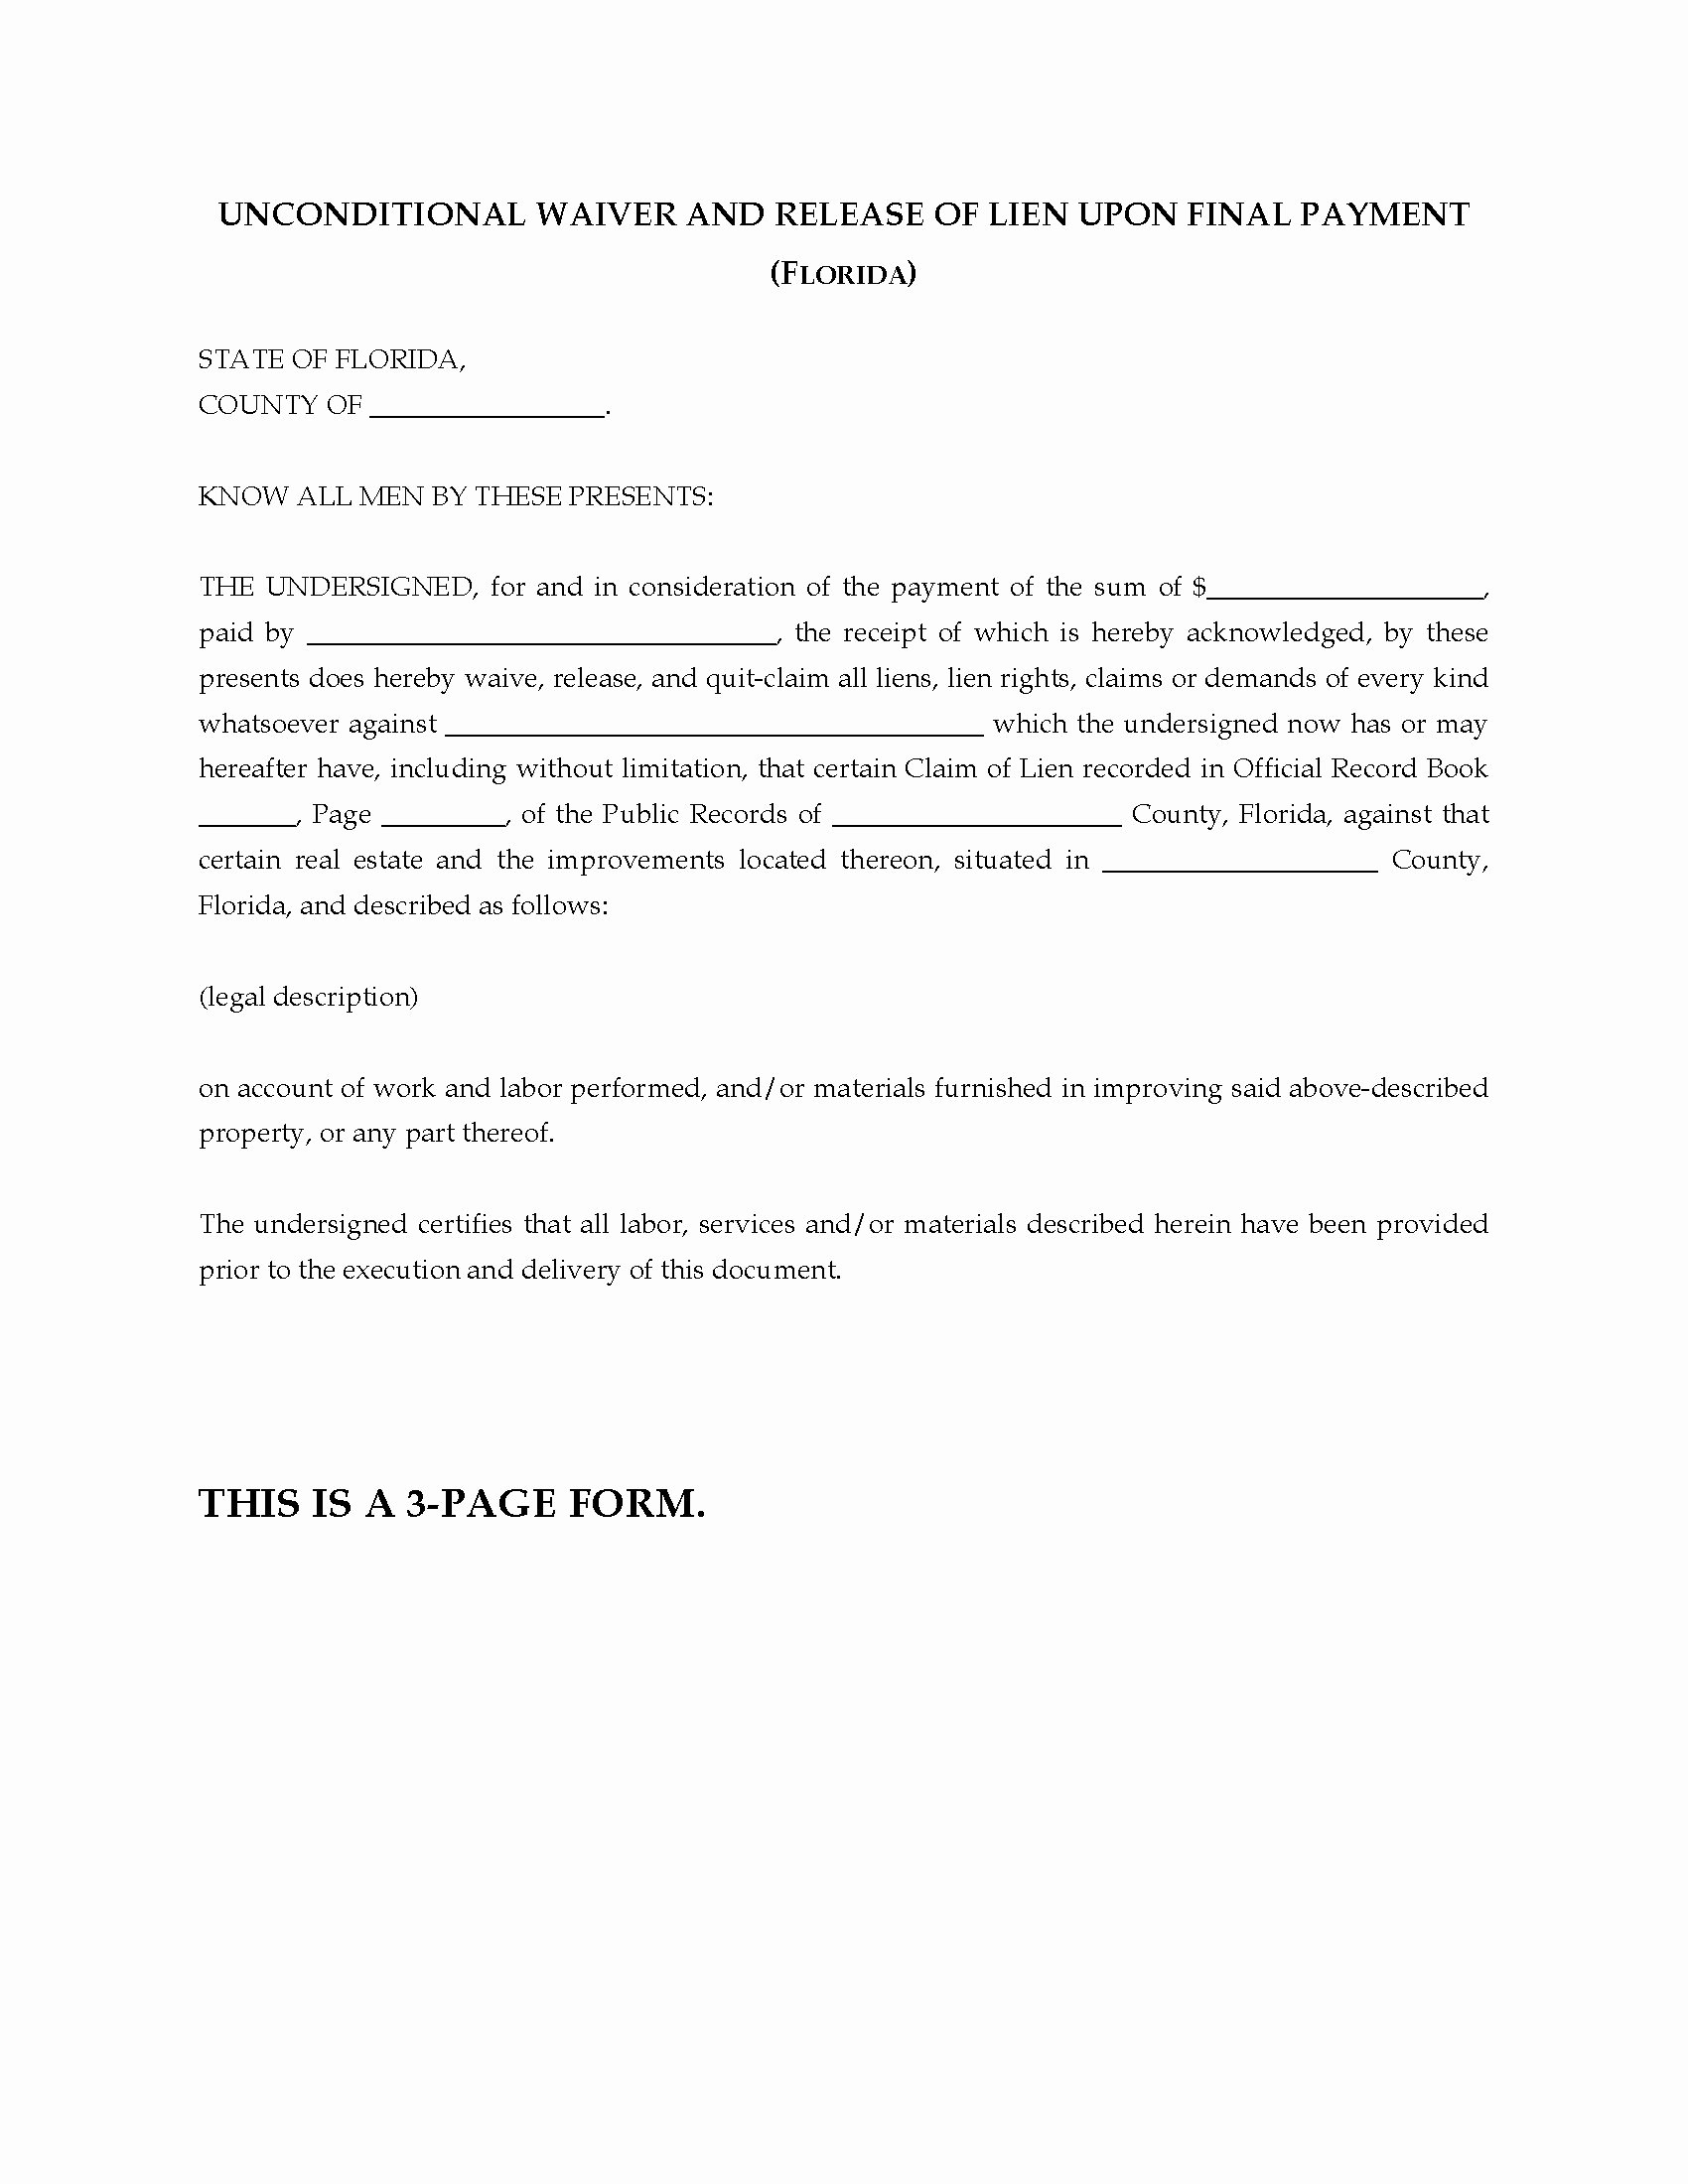 Final Lien Waiver Template Beautiful Florida Unconditional Waiver and Release Of Lien Final